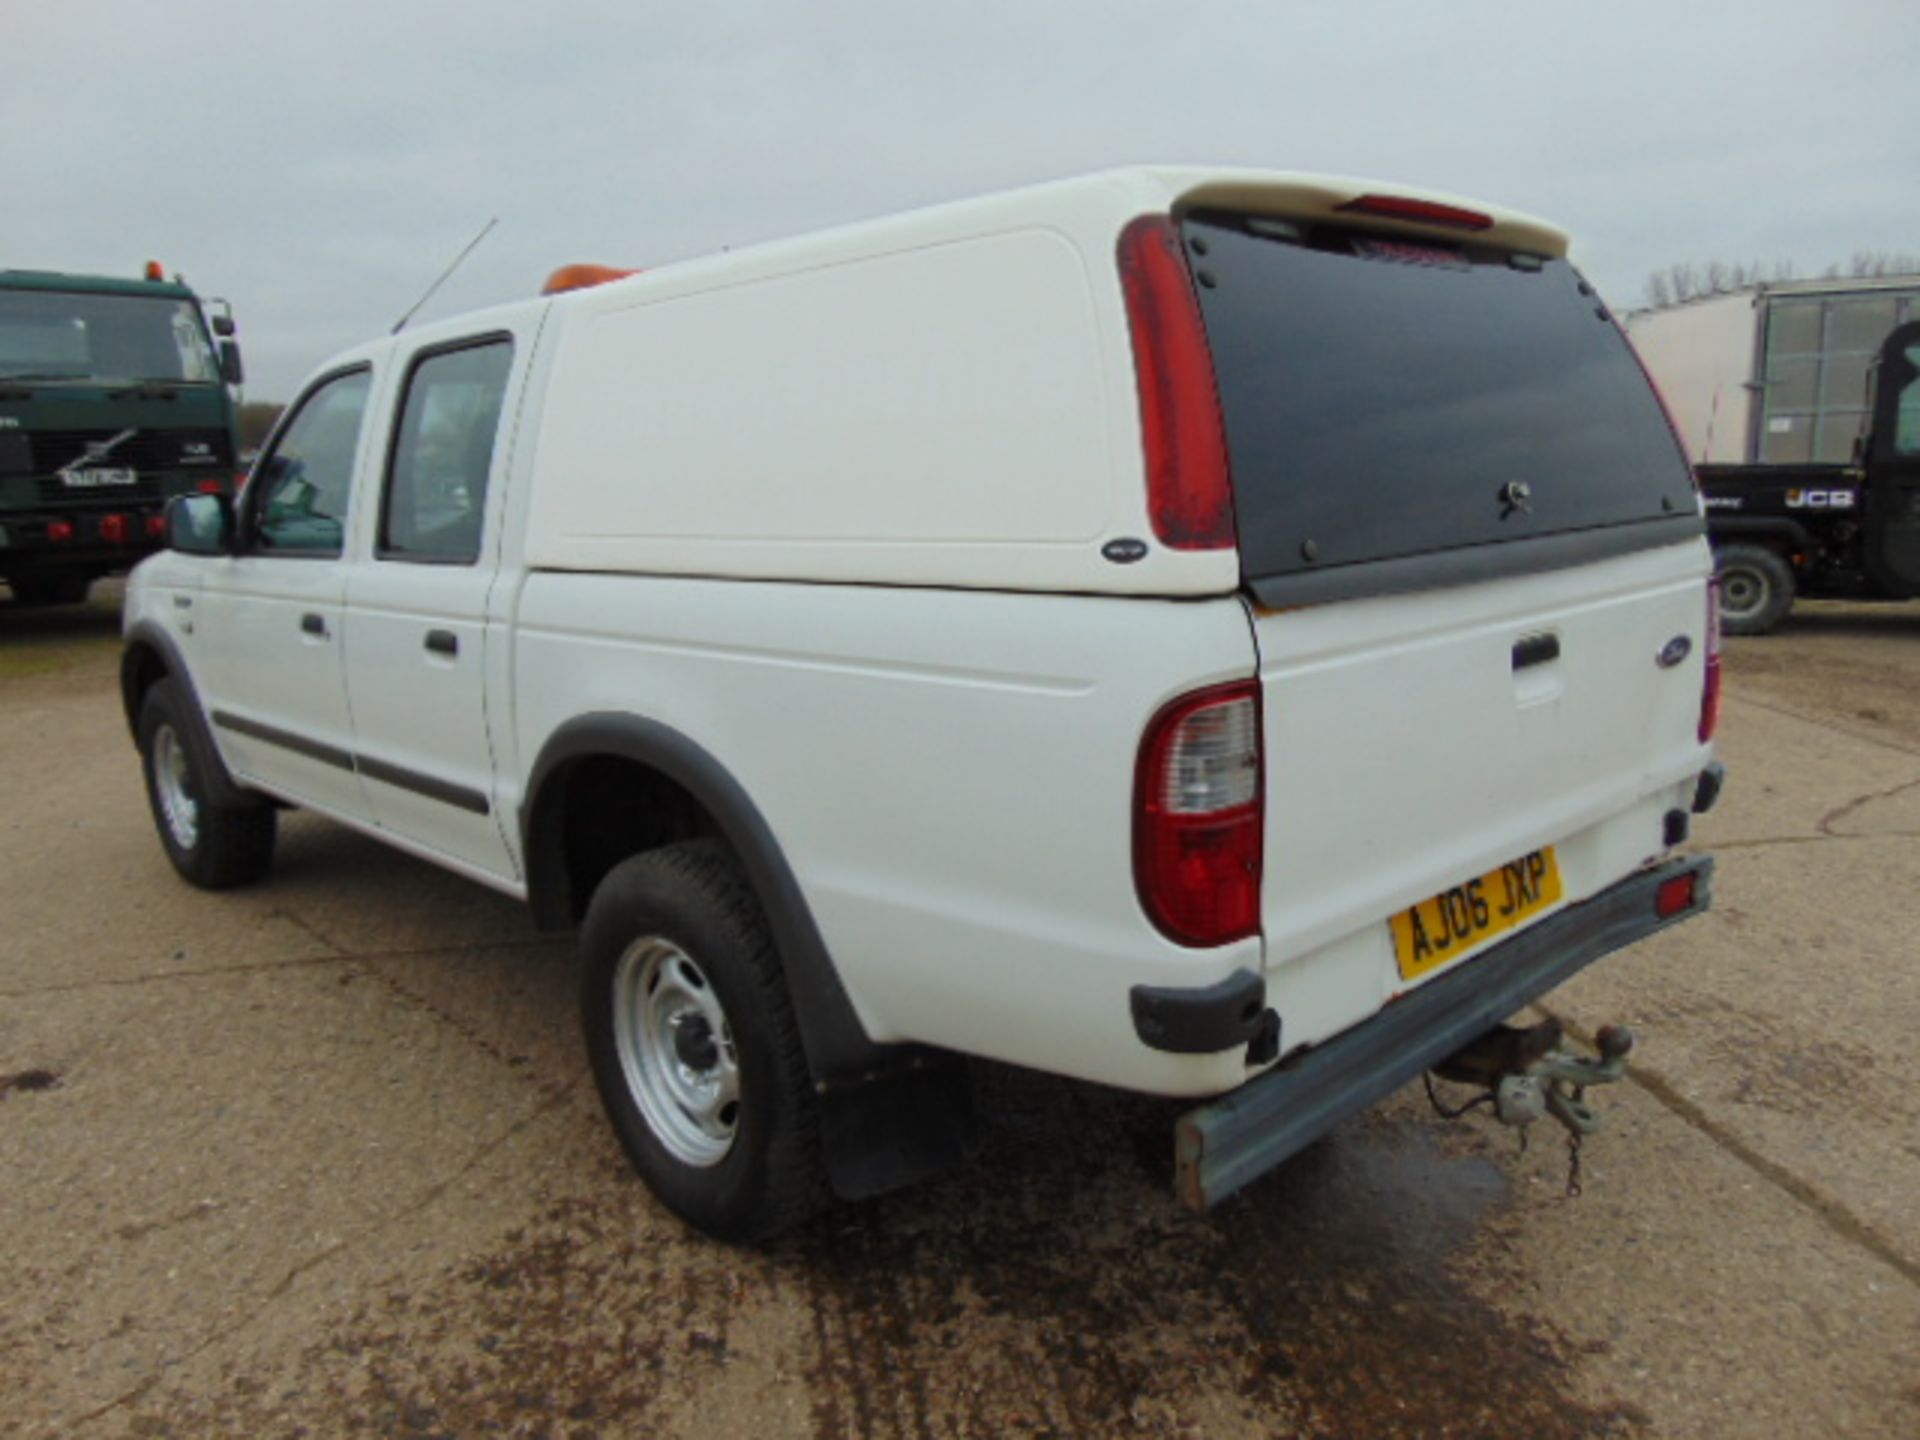 2006 Ford Ranger Double cab pickup - Image 8 of 14